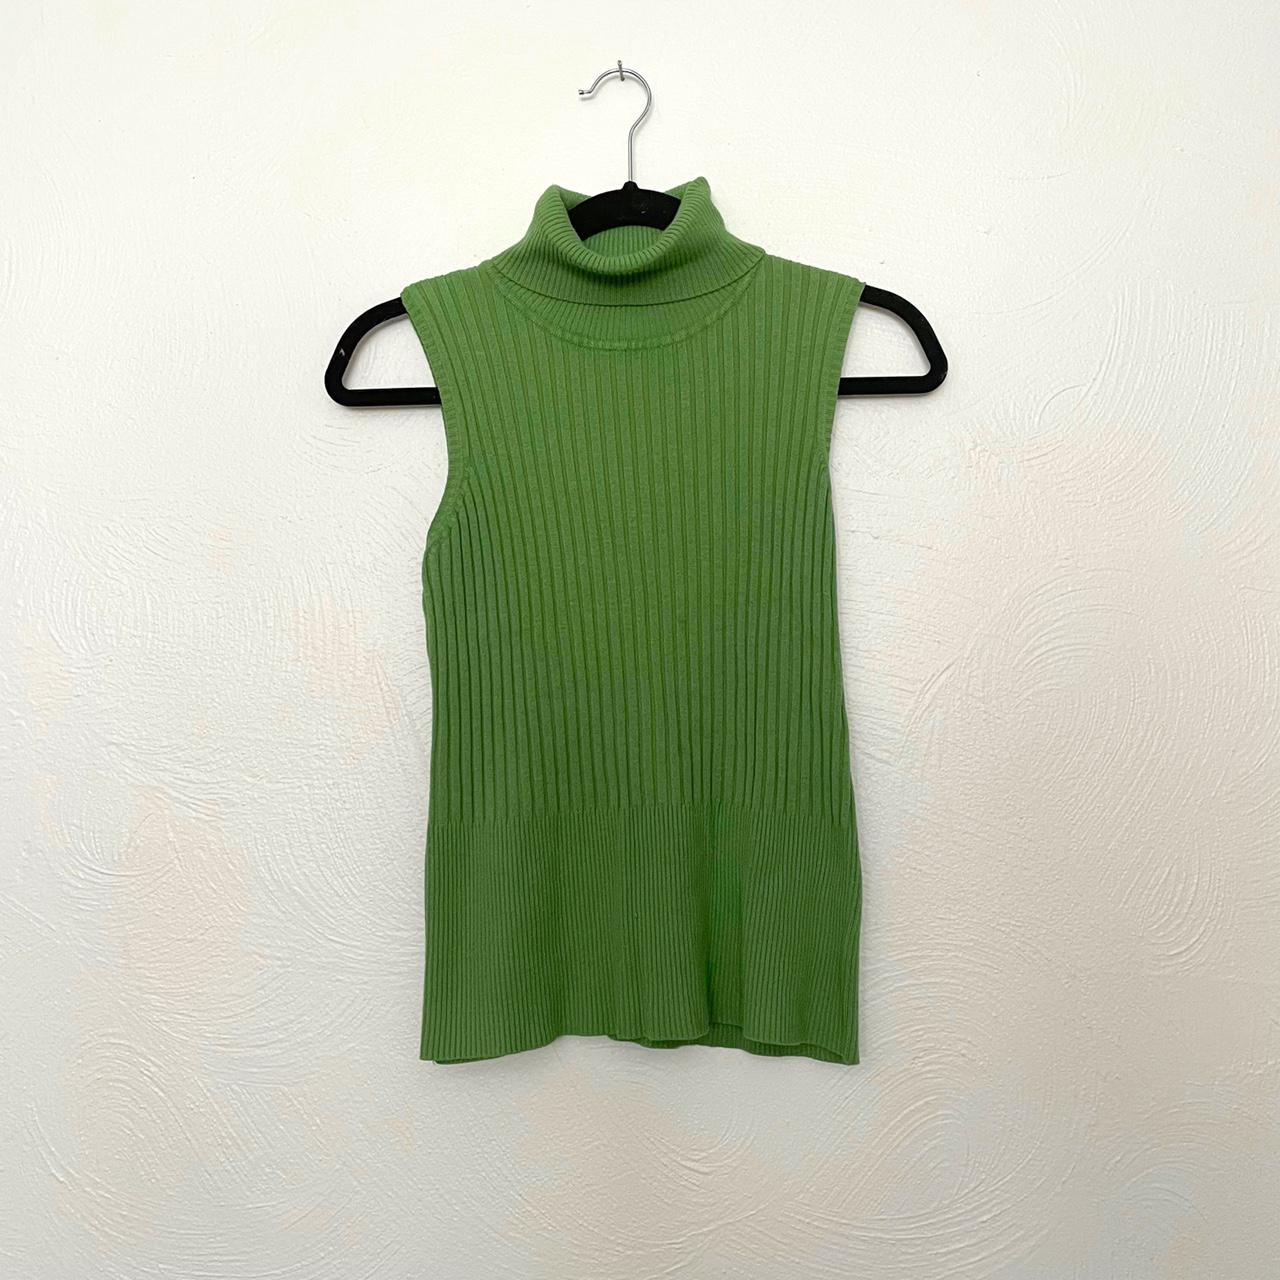 Product Image 2 - Green sleeveless turtleneck!

perfect for layering

sized